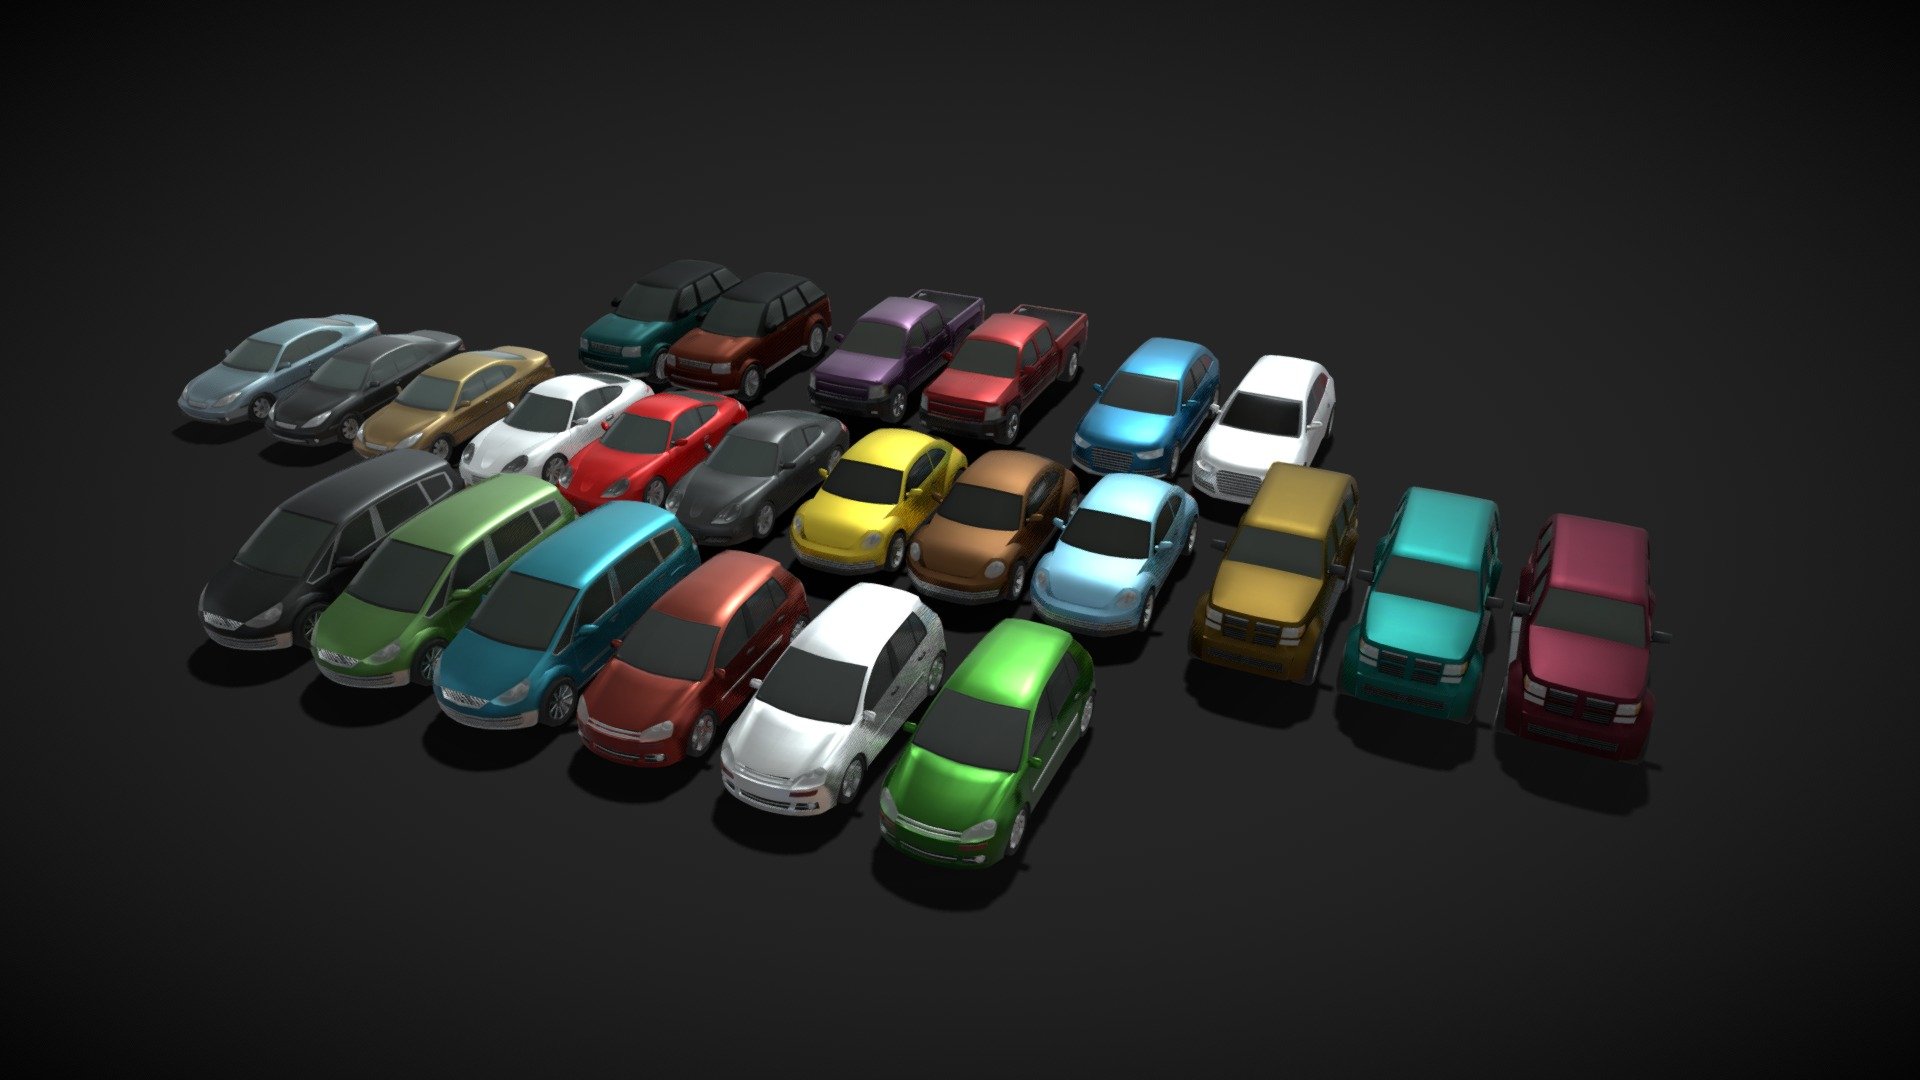 Generic Passenger Car 3D Models Pack  consists out of 45 generic car models:




9 different car types each of them with 5 different color textures (3 are presented due to technical limitations).

Windows are not-transparent (opaque) and there is no interior (in order to keep models as low poly as it goes).

File formats included in the package are: FBX, OBJ, BLEND, gLTF (generated), USDZ (generated)

Native software file format: BLEND

Textures: Color, Metallic, Roughness, Normal, AO.

All textures are 2k resolution.

You can buy any of them as a single model, or save 49% if you buy this pack.

Models included are:




Coupe Car - 7568 P &amp; 9339 V

Sedan Car - 5785 P &amp; 5204 V

Hatchback Car - 5278 P &amp; 5812 V

Minivan Car - 4982 P &amp; 5436 V

Pickup Truck - 5146 P &amp; 5348 V

Station Wagon - 4407 P &amp; 4800 V

SUV Car Generic - 4221 P &amp; 4923 V

Off-Road Car - 4815 P &amp; 5040 V

Compact Car - 3982 P &amp; 4382 V
 - Generic Passenger Car 3D Models Pack - Buy Royalty Free 3D model by 3DDisco 3d model